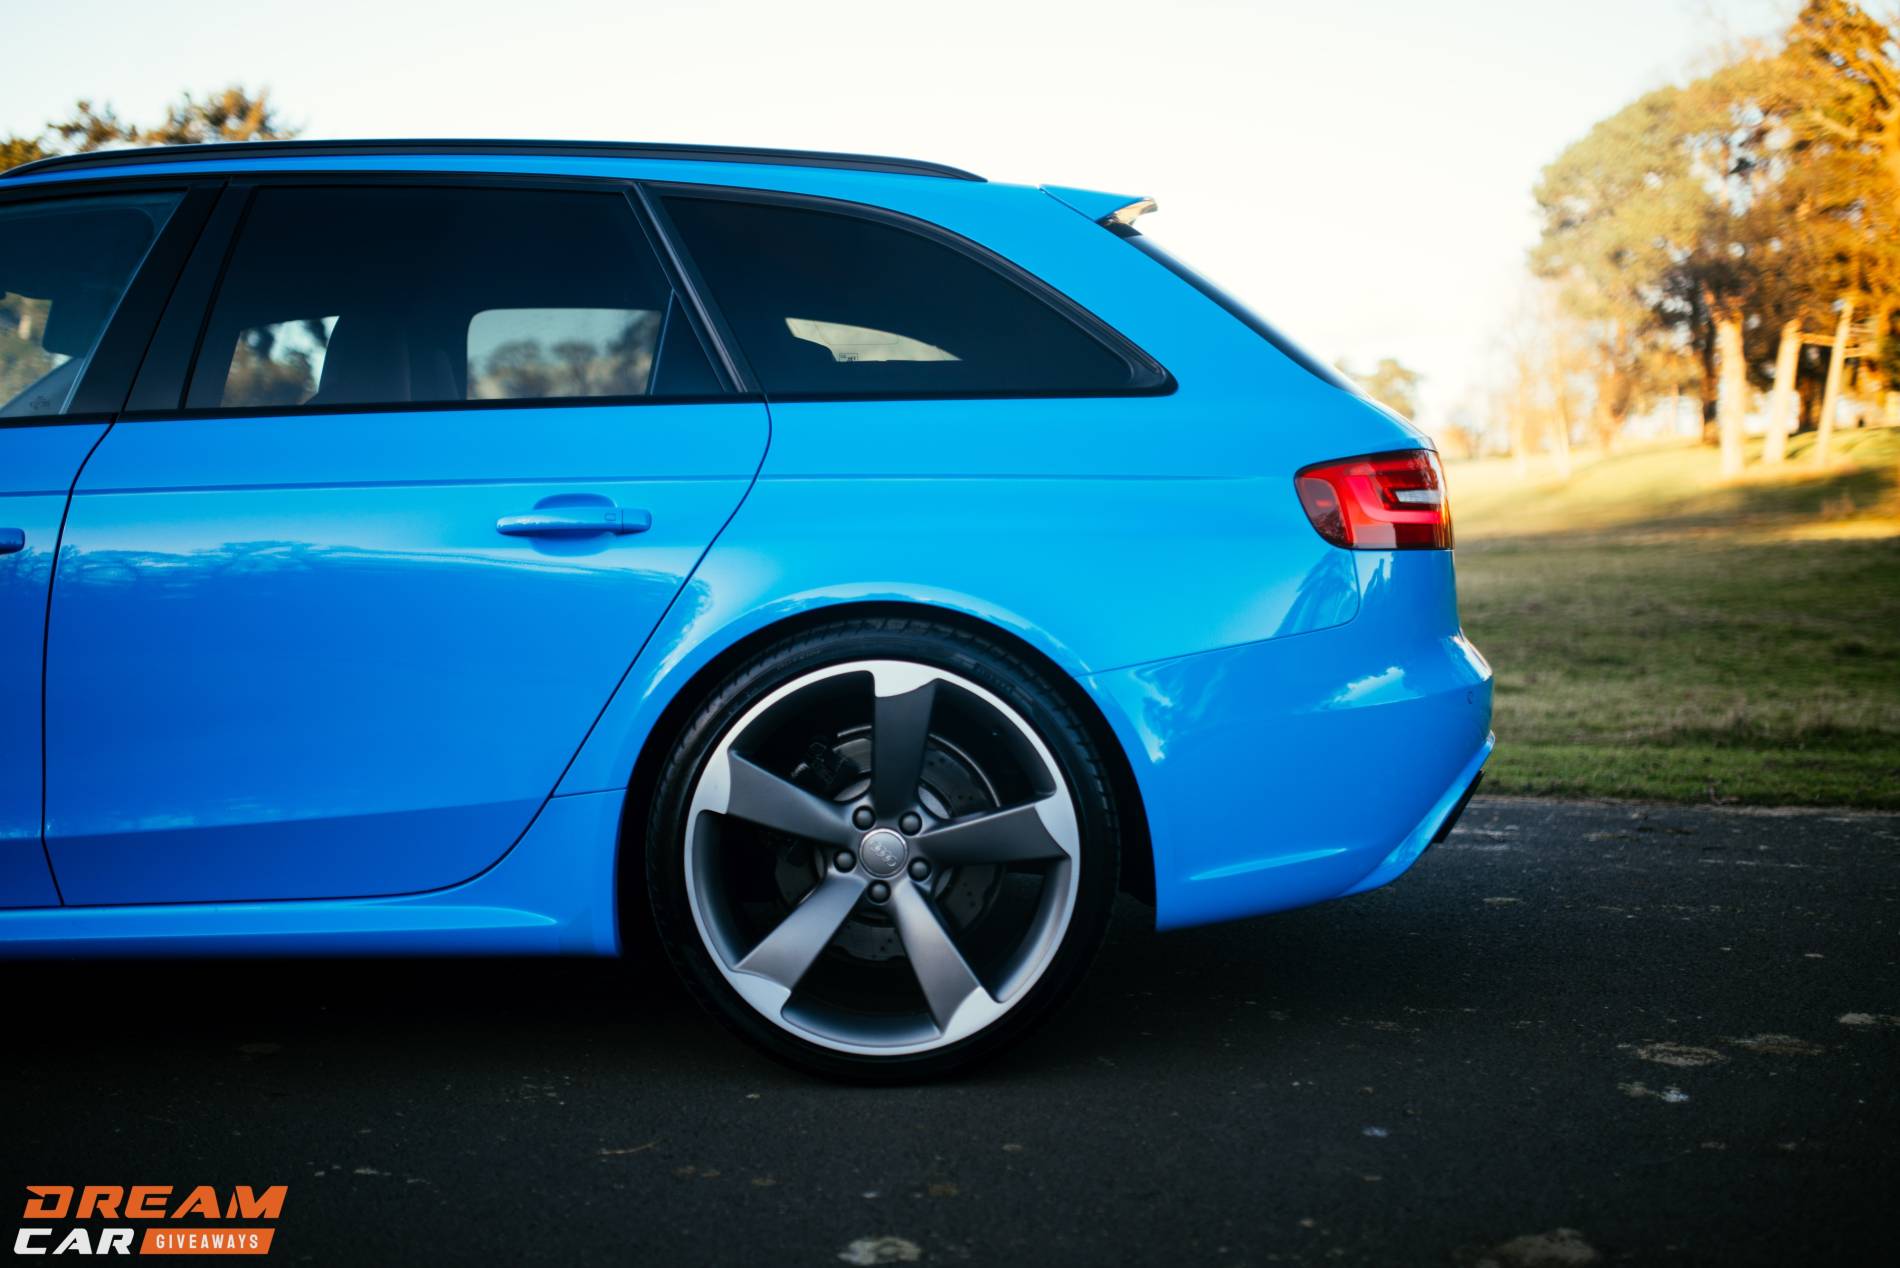 Riviera Blue RS4 & £1500 or £27,000 Tax Free